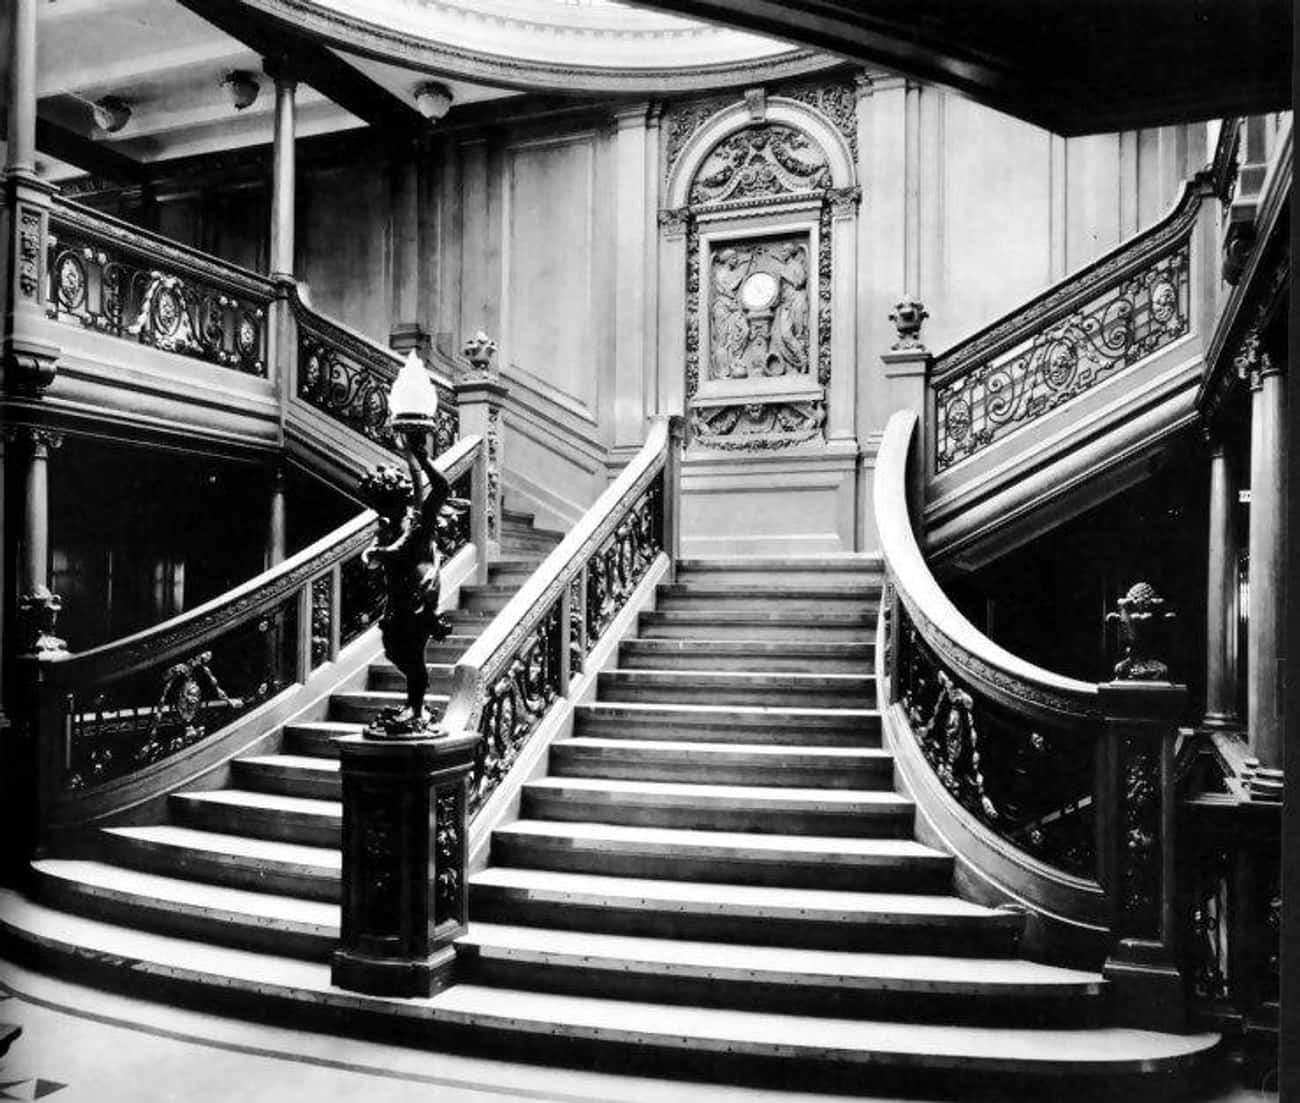 A Lady In Black Appears On The Grand Staircase